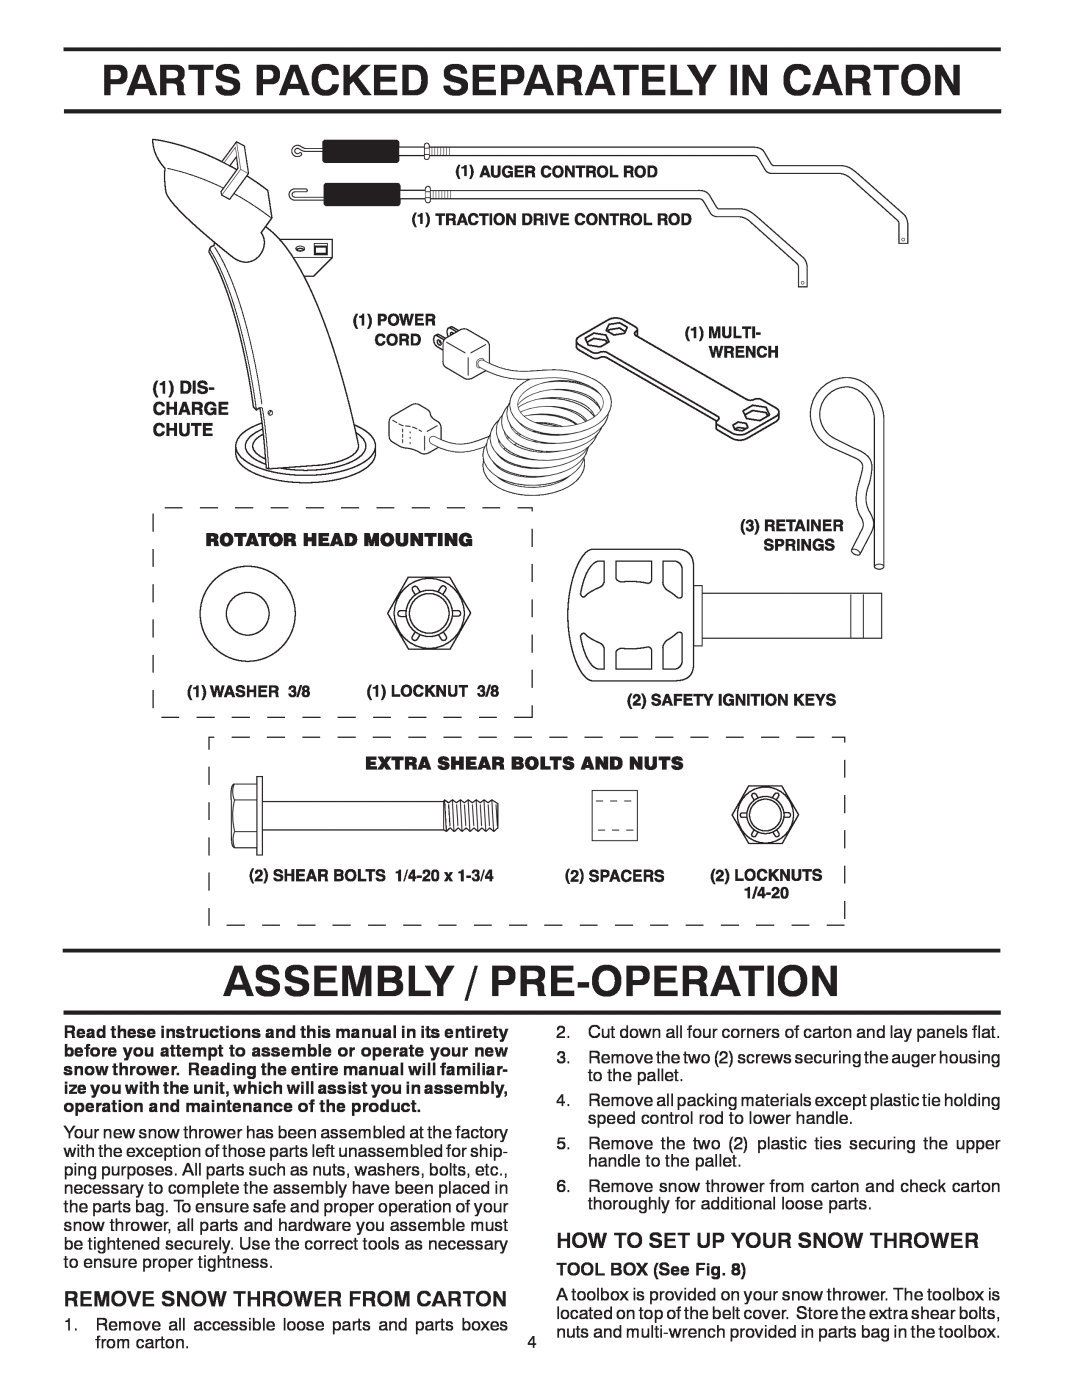 Poulan 96198002000, 415308 Parts Packed Separately In Carton Assembly / Pre-Operation, How To Set Up Your Snow Thrower 